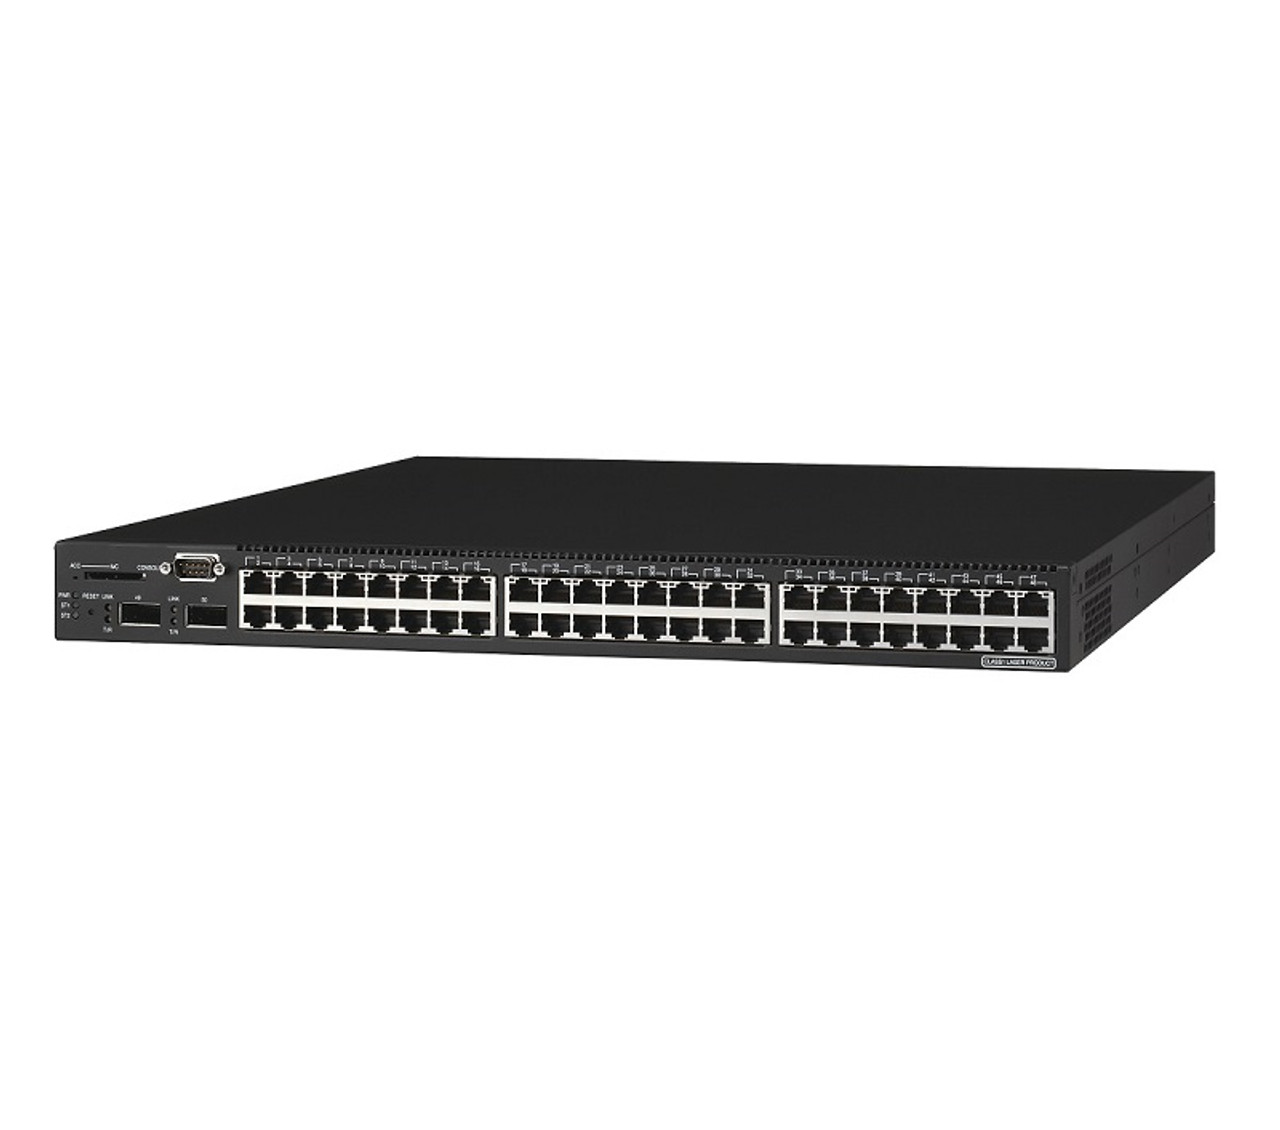 JC103-61201 - HP 5800-24g-SFP Switch - Switch - 24 Ports - Managed - Rack-mountable